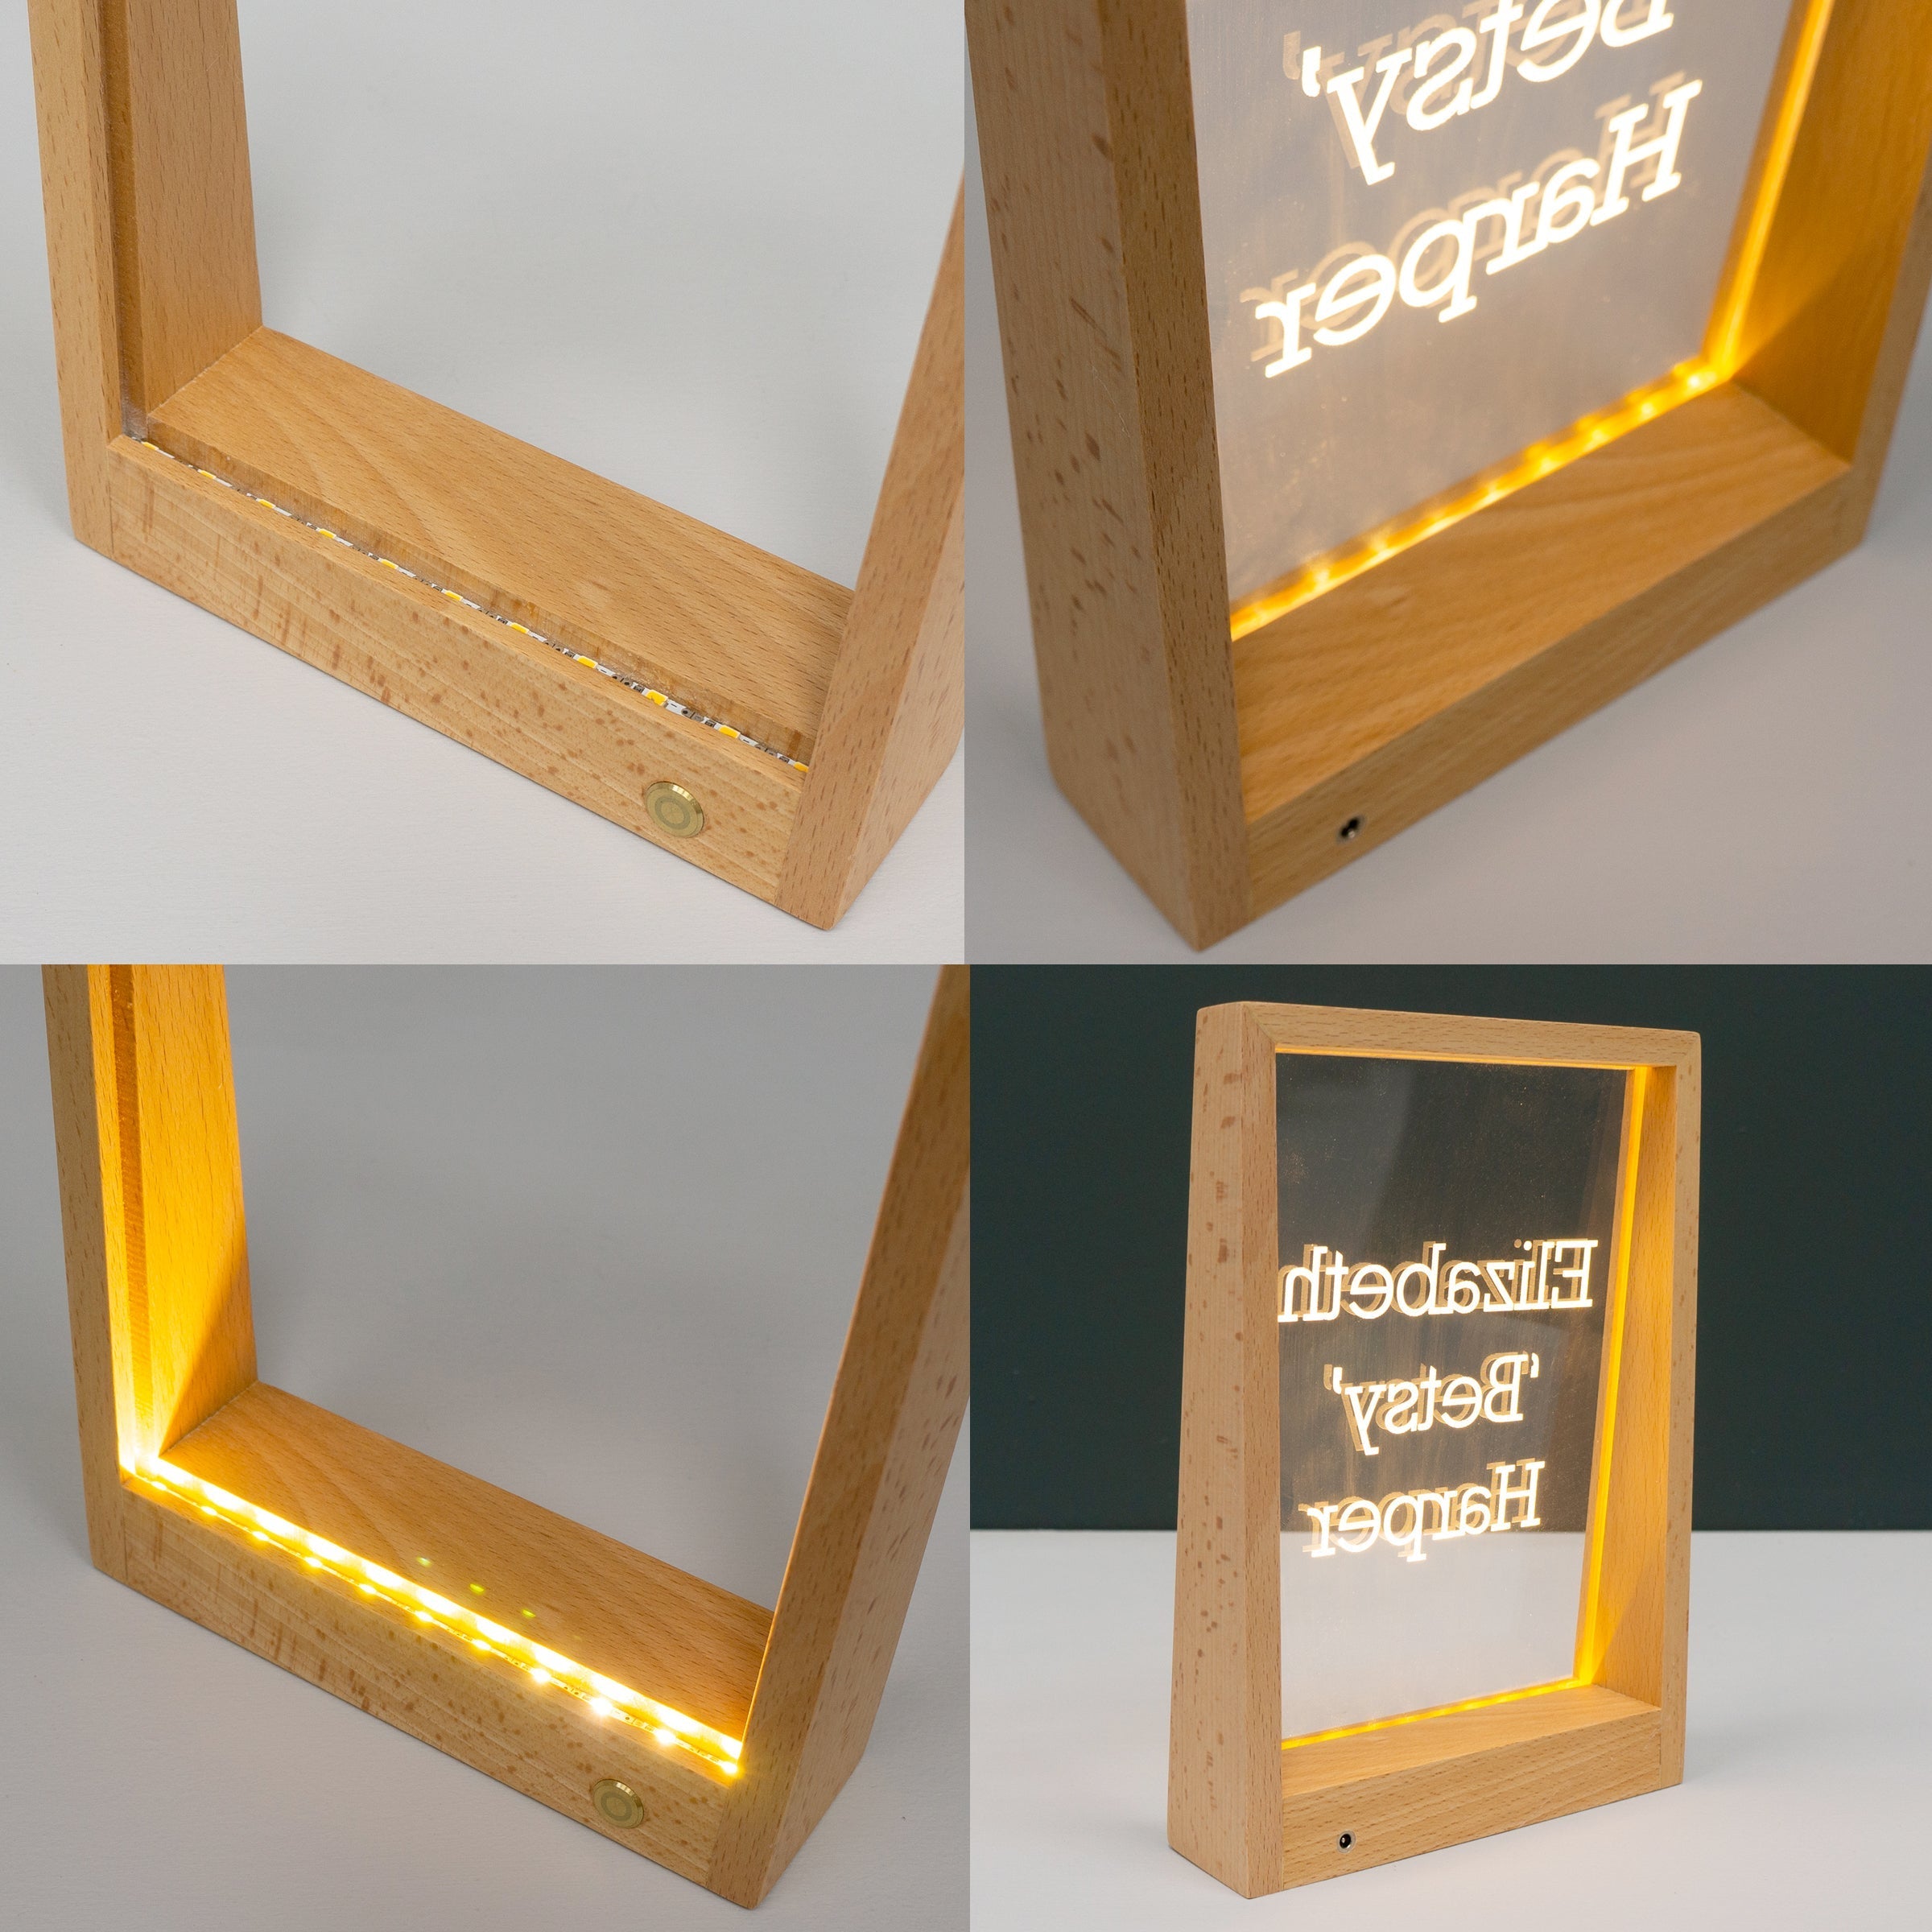 Wireless personalised Cocktail bar bar light up sign.